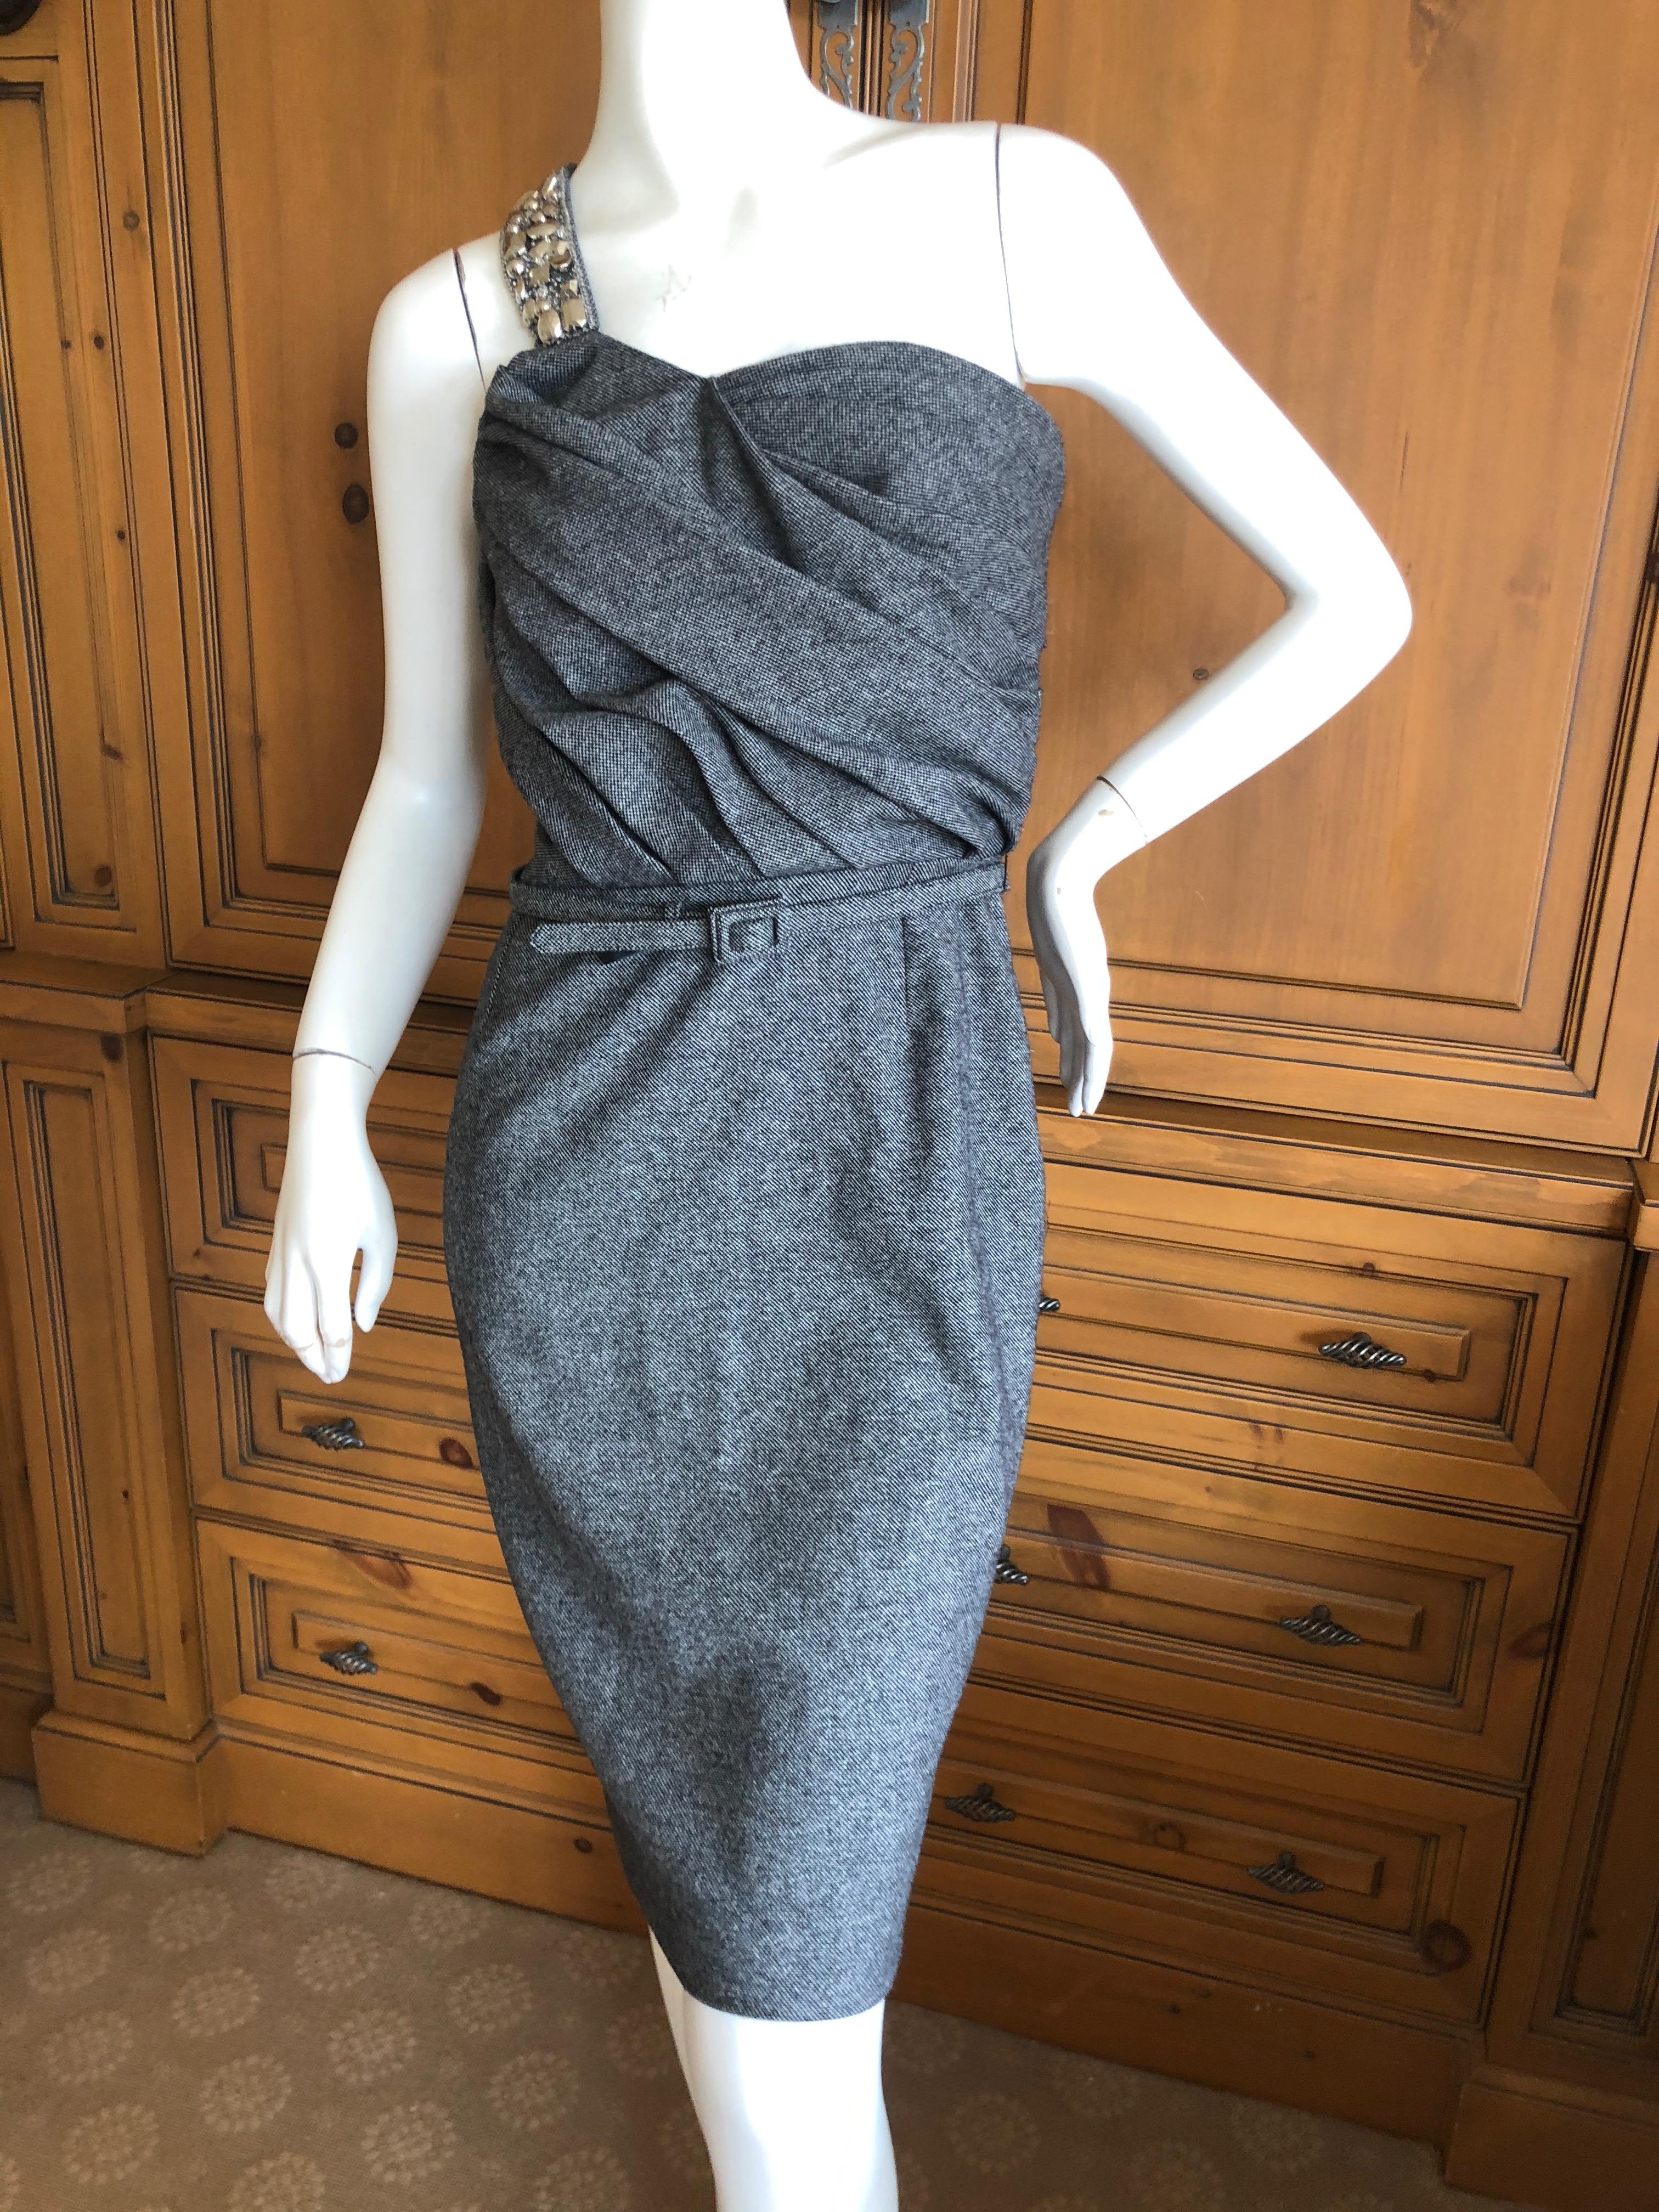 Christian Dior John Galliano Gray Tweed Cocktail Dress with Jewel Shoulder Strap For Sale 4